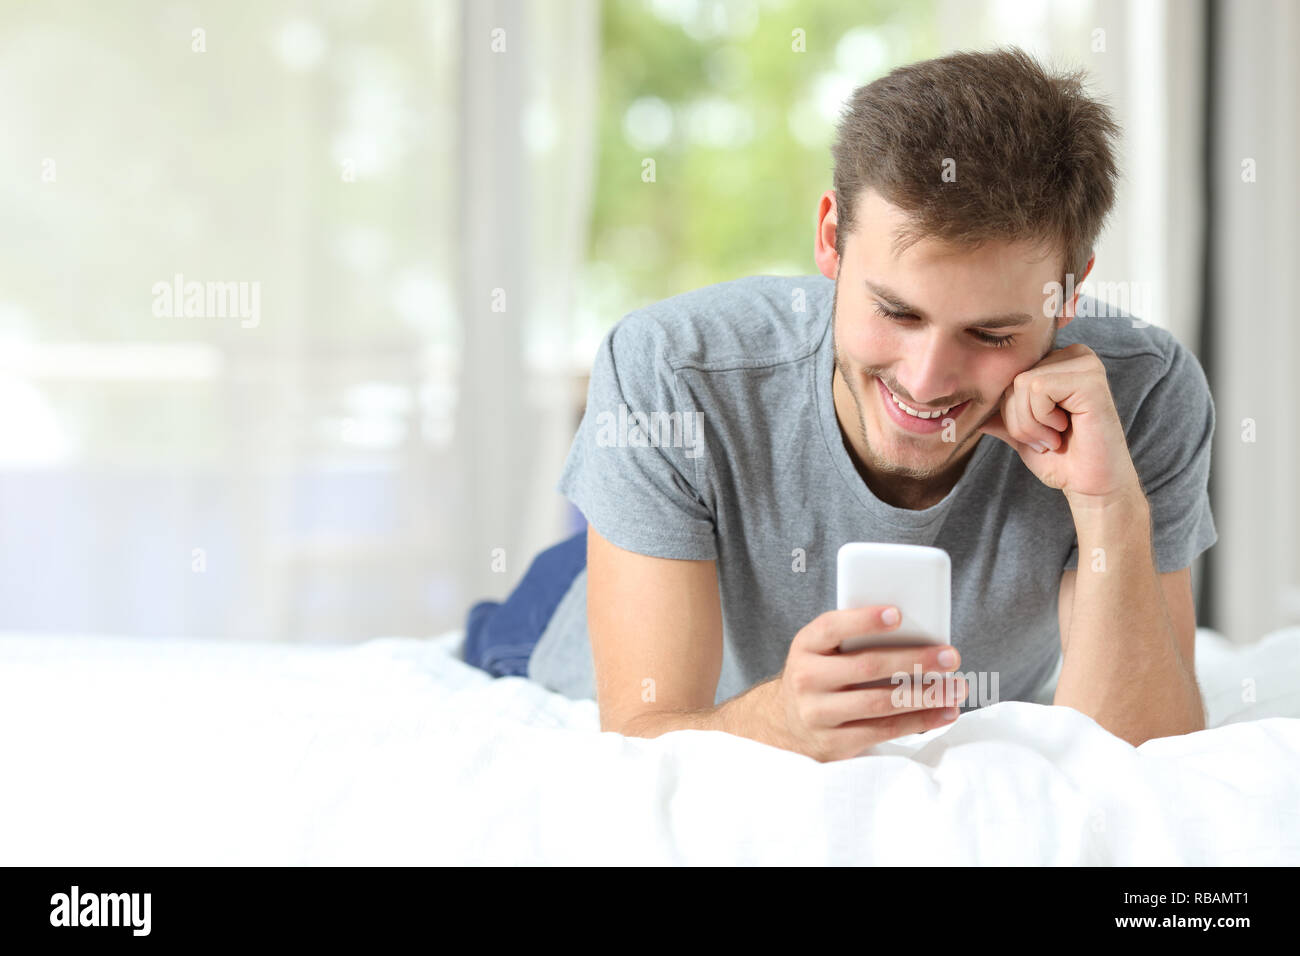 Front view portrait of a single man checking smart phone on a bed at hotel room Stock Photo